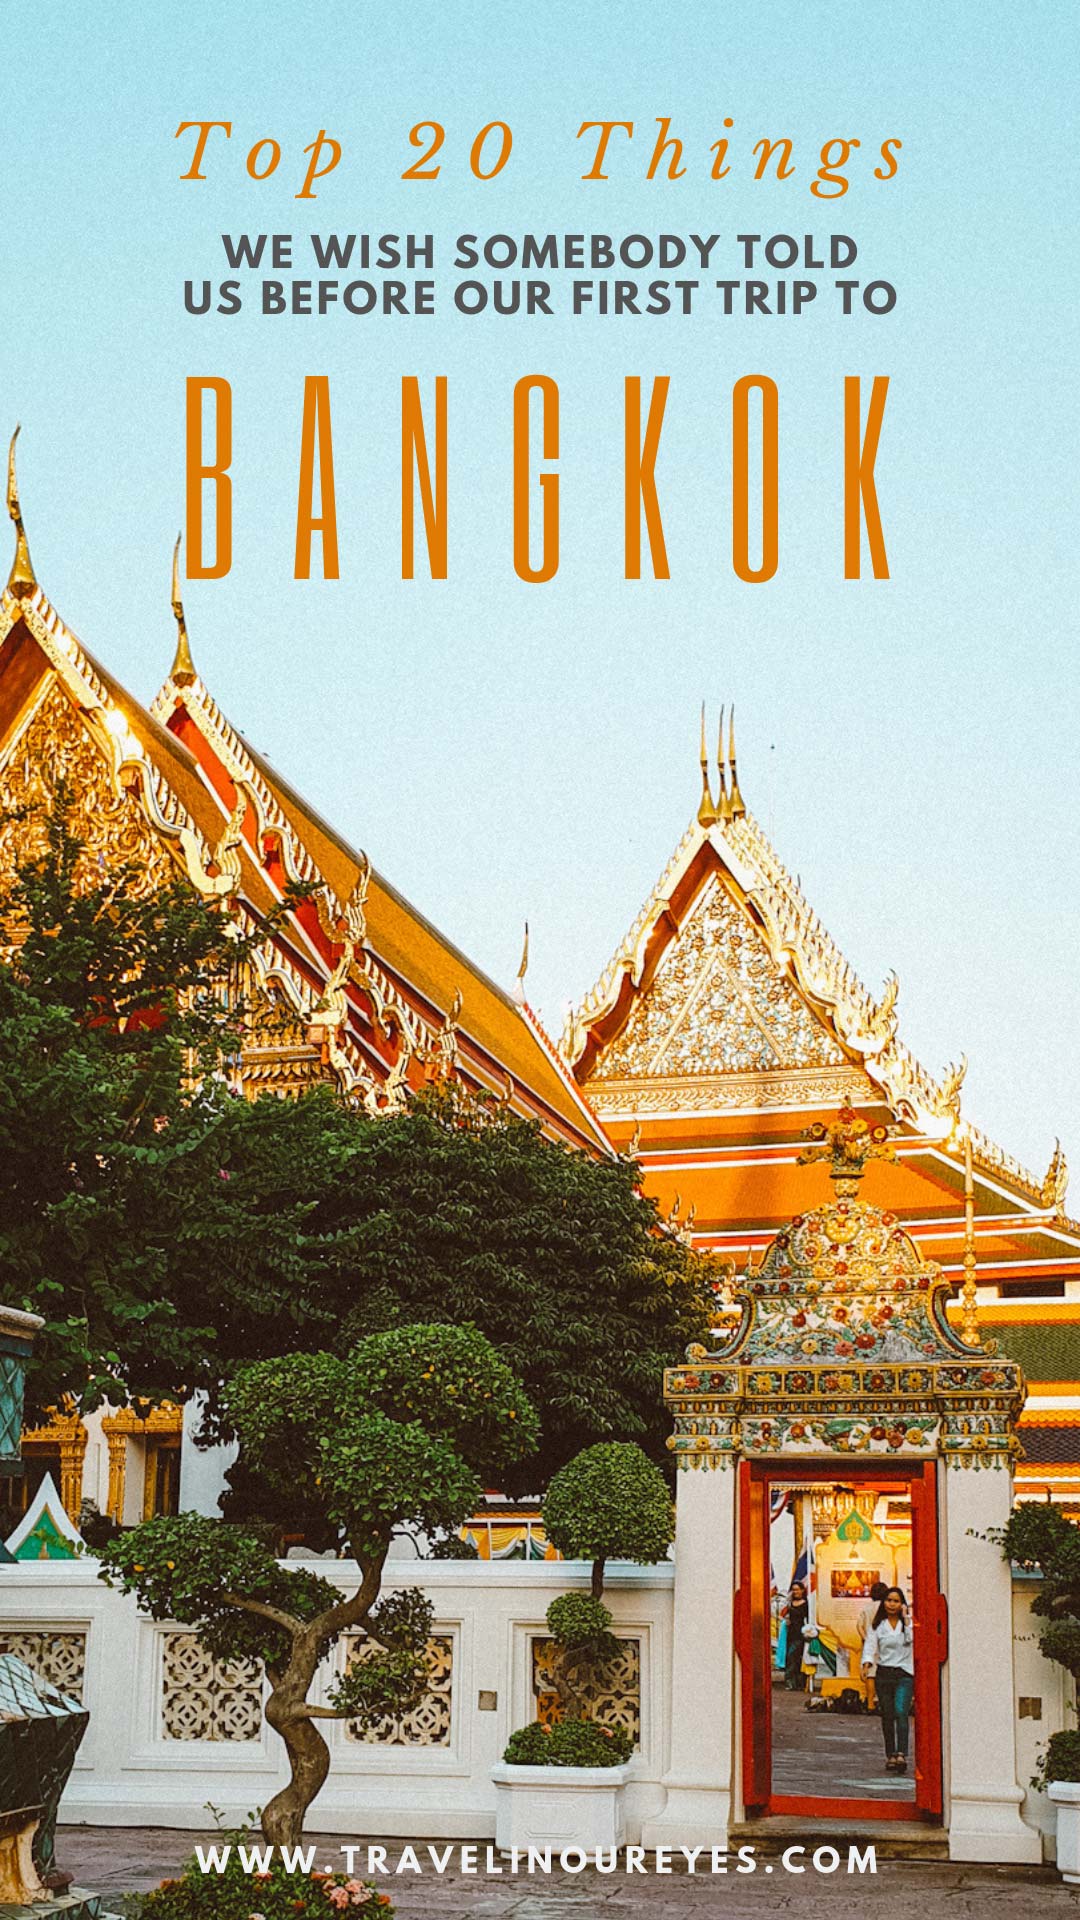 Bangkok - What you need to know before you go – Go Guides